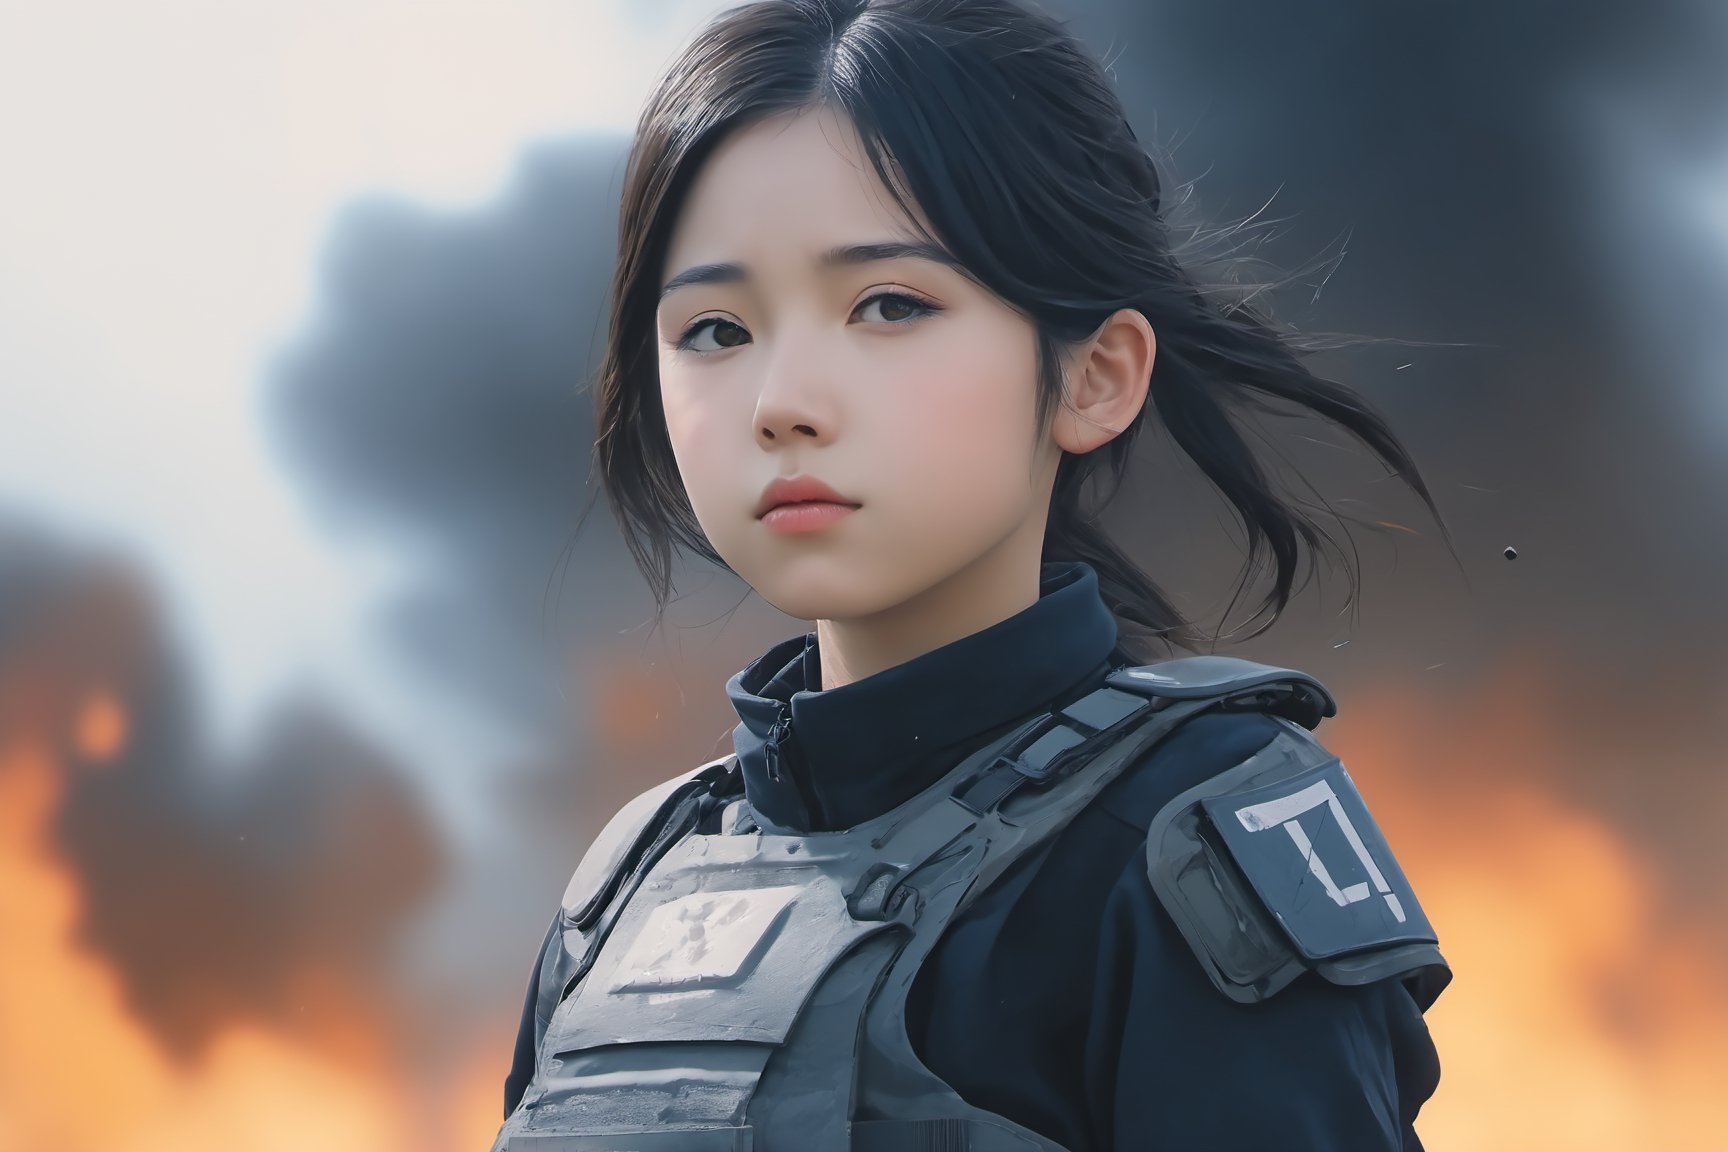 1girl, portrait, SWAT uniform((uniform detail like army force)) with super powerful arm, sidelighting, wallpaper, Masterpiece, 8k, battle field background, ruin all over the place, after deep impact by terrorist destroying attacted, The sky is obscured from the blue by flames, soot and battle fires are everywhere, and there is a hidden fire dragon in the background 
Wide angle shot
8k, ultra realistic, anime_screencap,IncrsXLRanni,A girl in the wild 